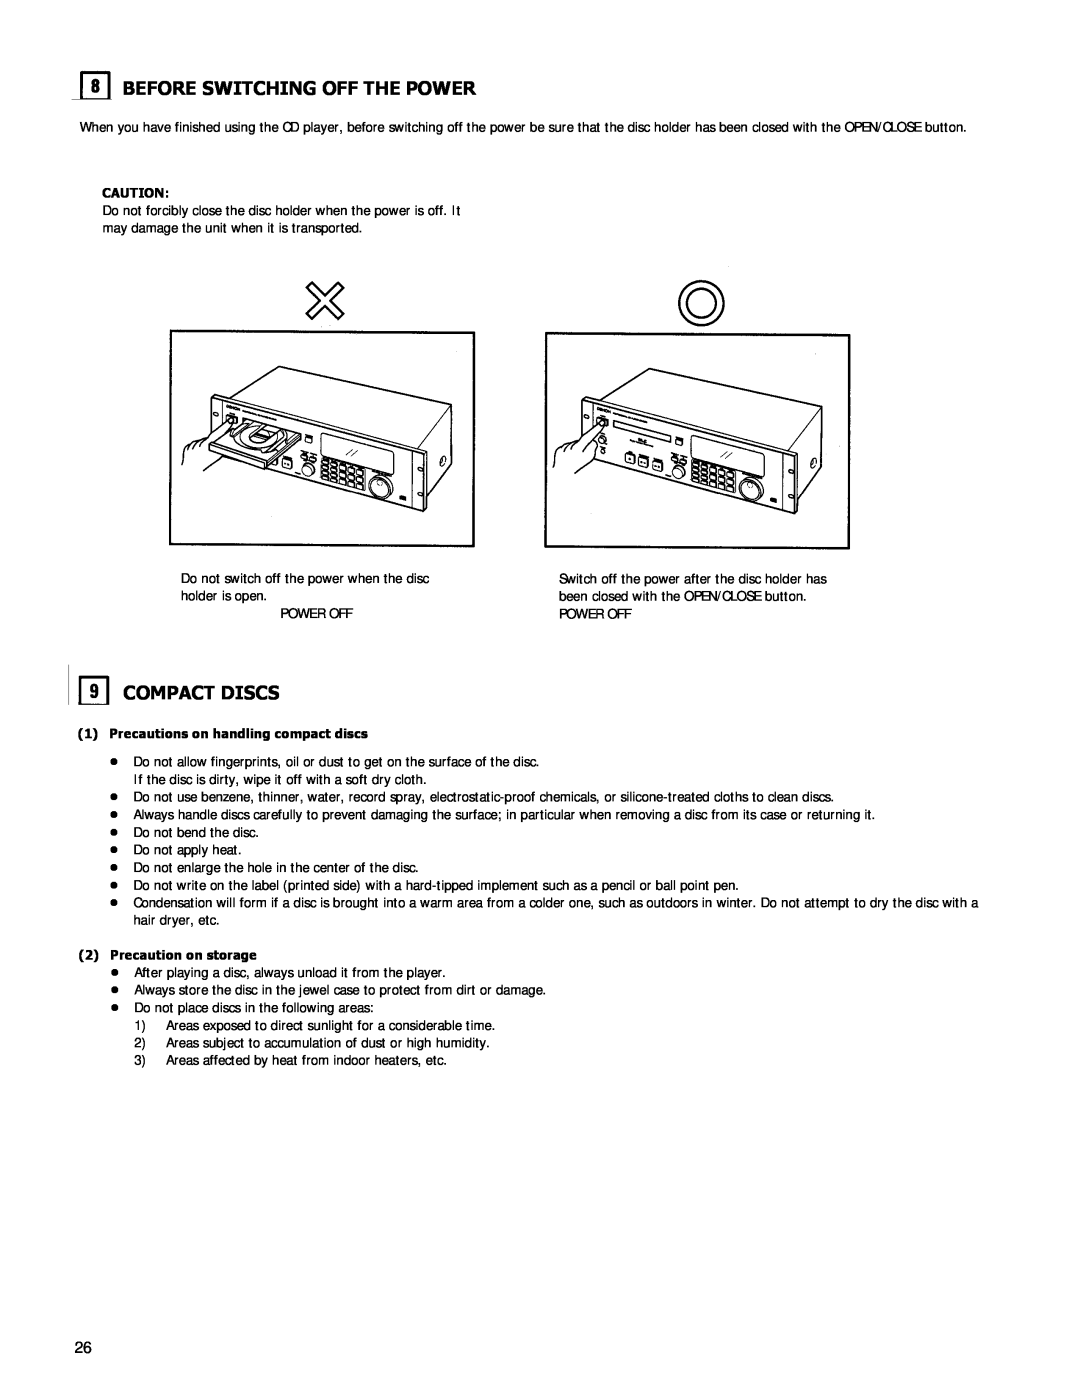 Denon DN-C680 manual Before Switching Off The Power, Compact Discs, 1Precautions on handling compact discs 